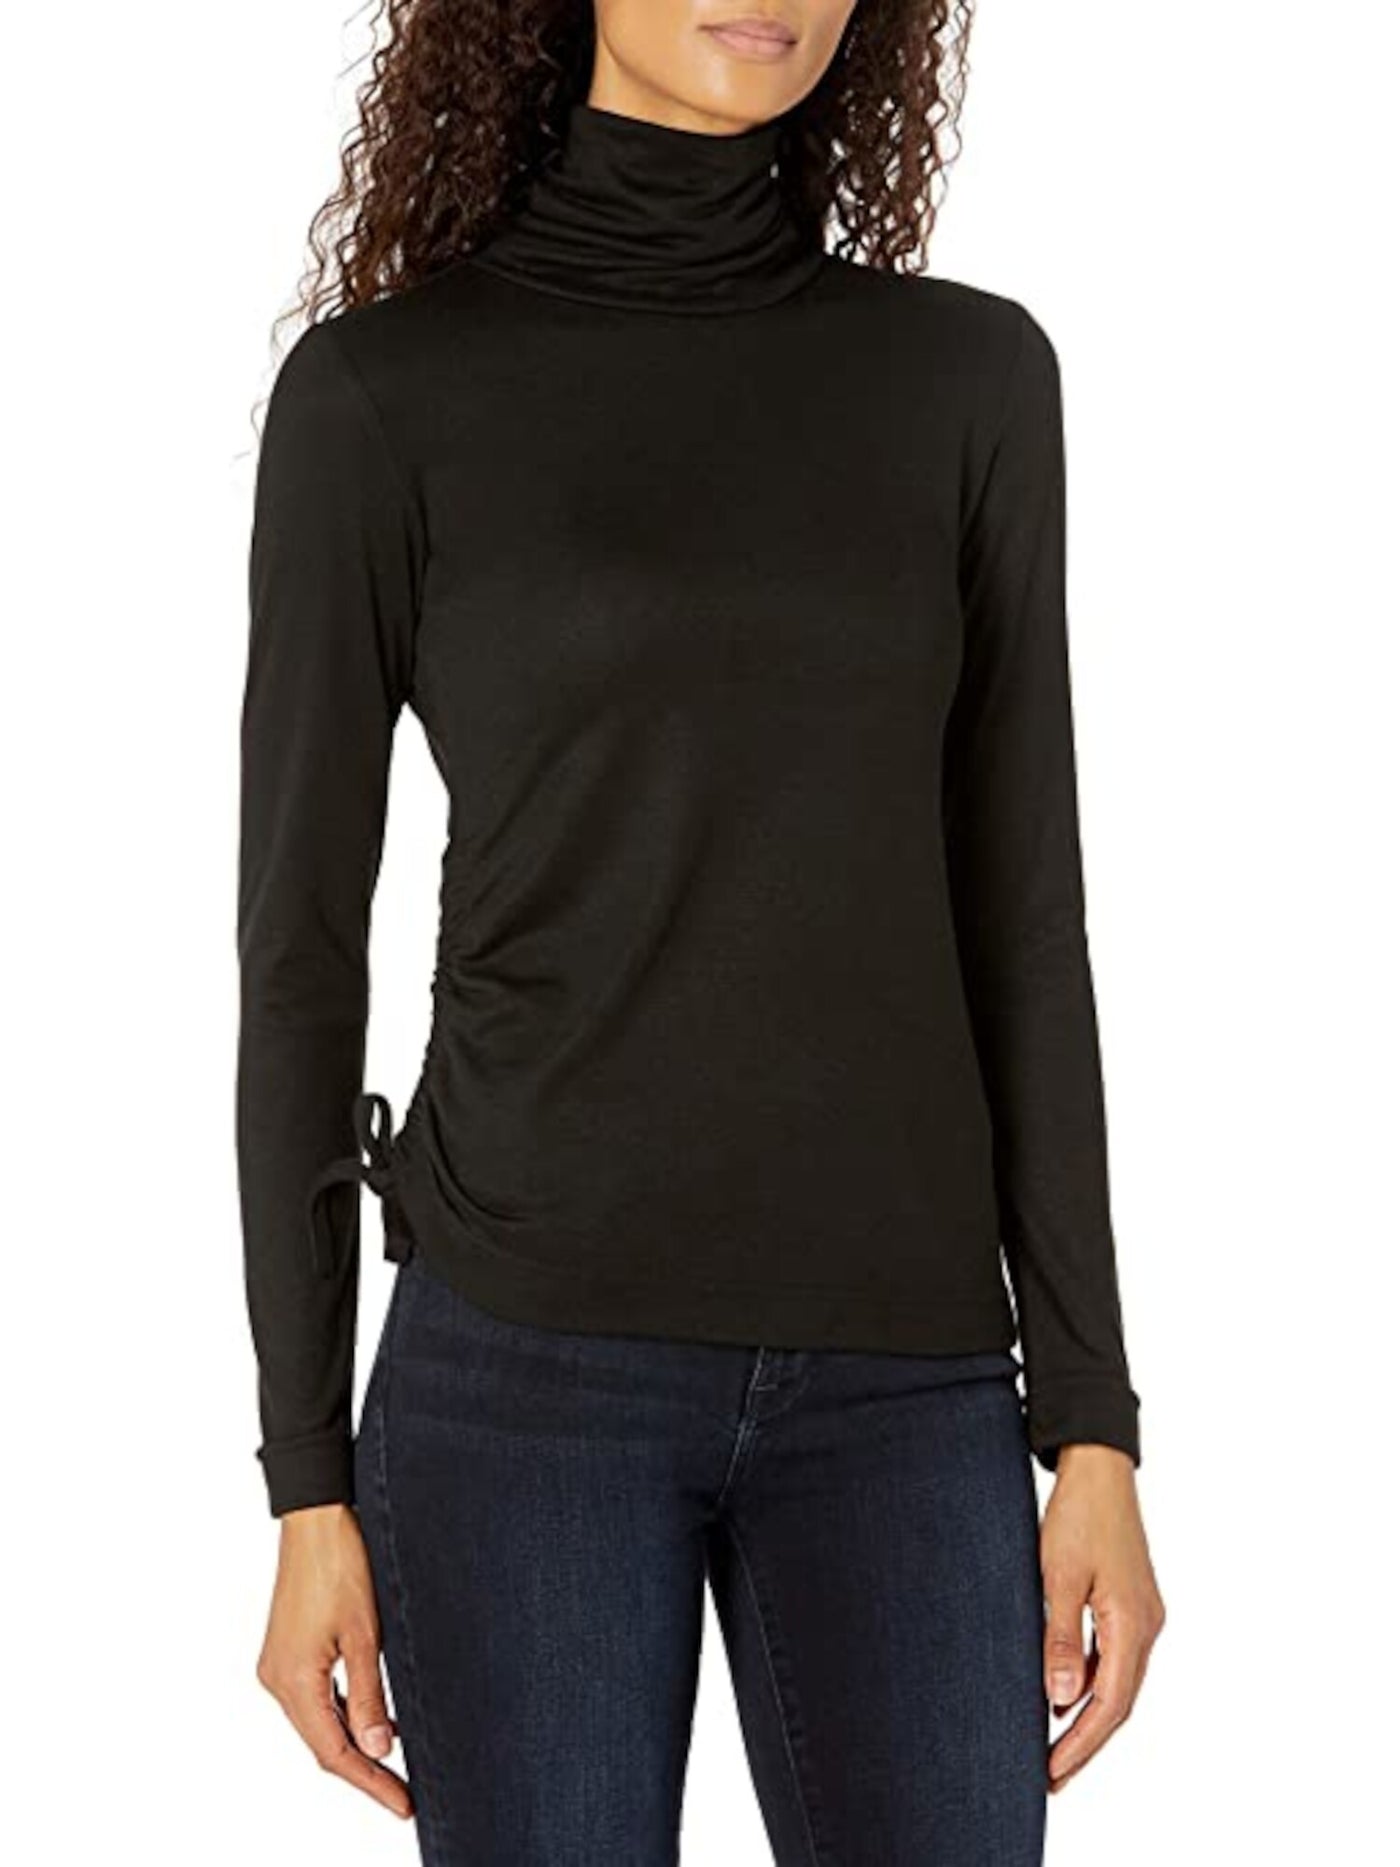 B NEW YORK Womens Black Stretch Ruched Turtle Neck Top M